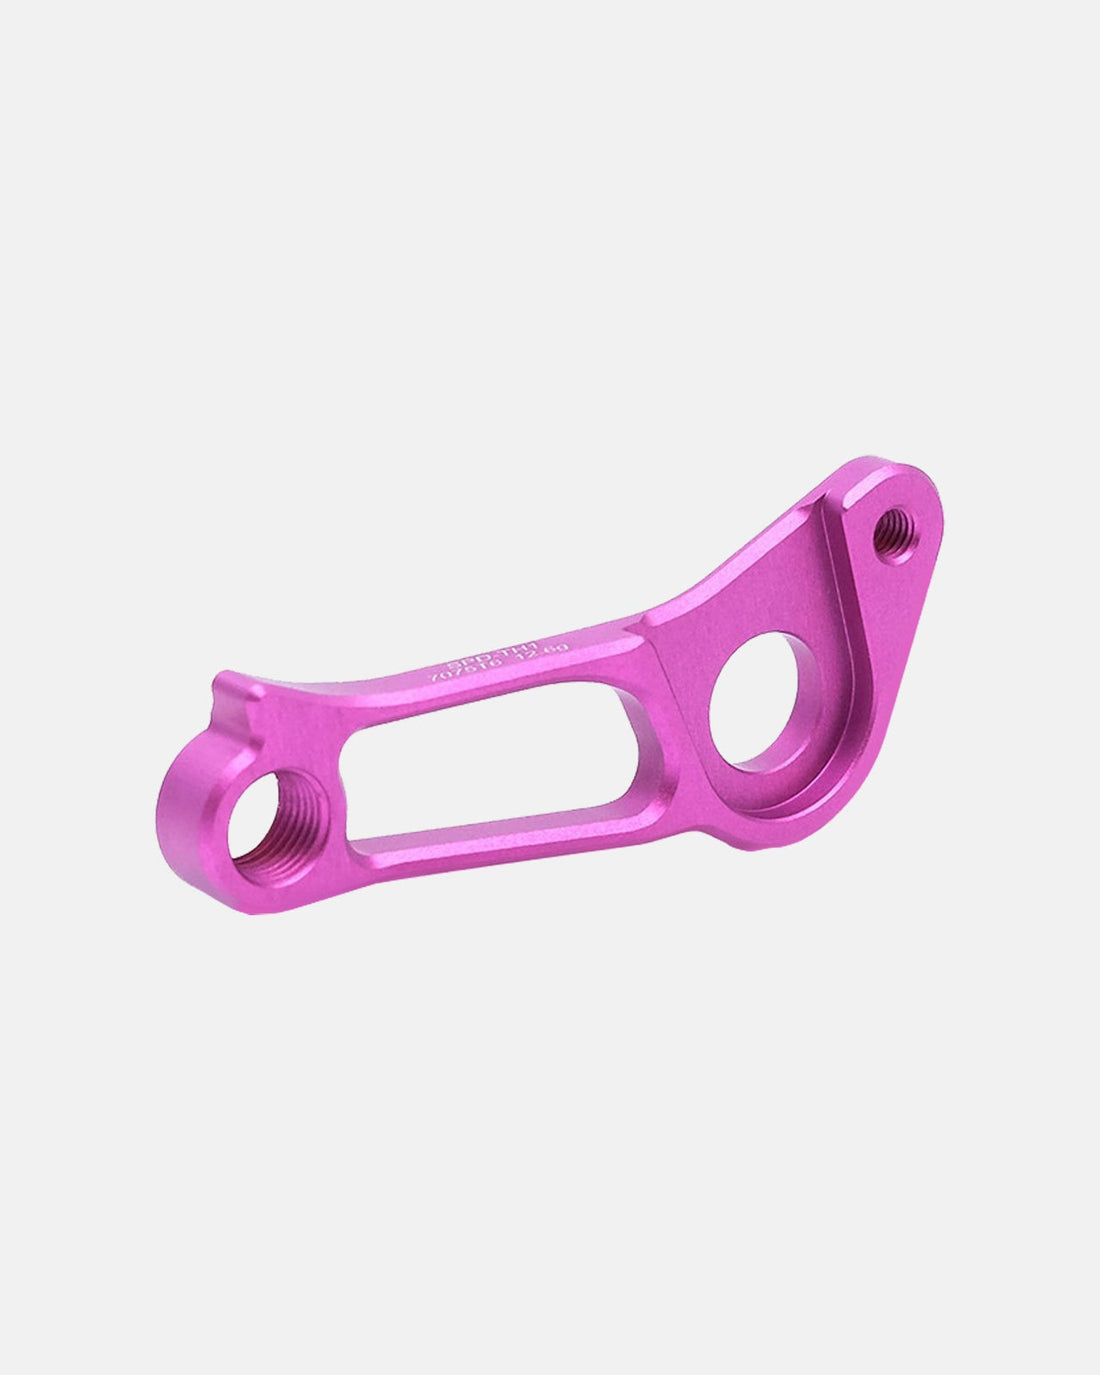 Sigeyi Specialized Direct-Mount Derailleur Hanger - Pink - Sigeyi